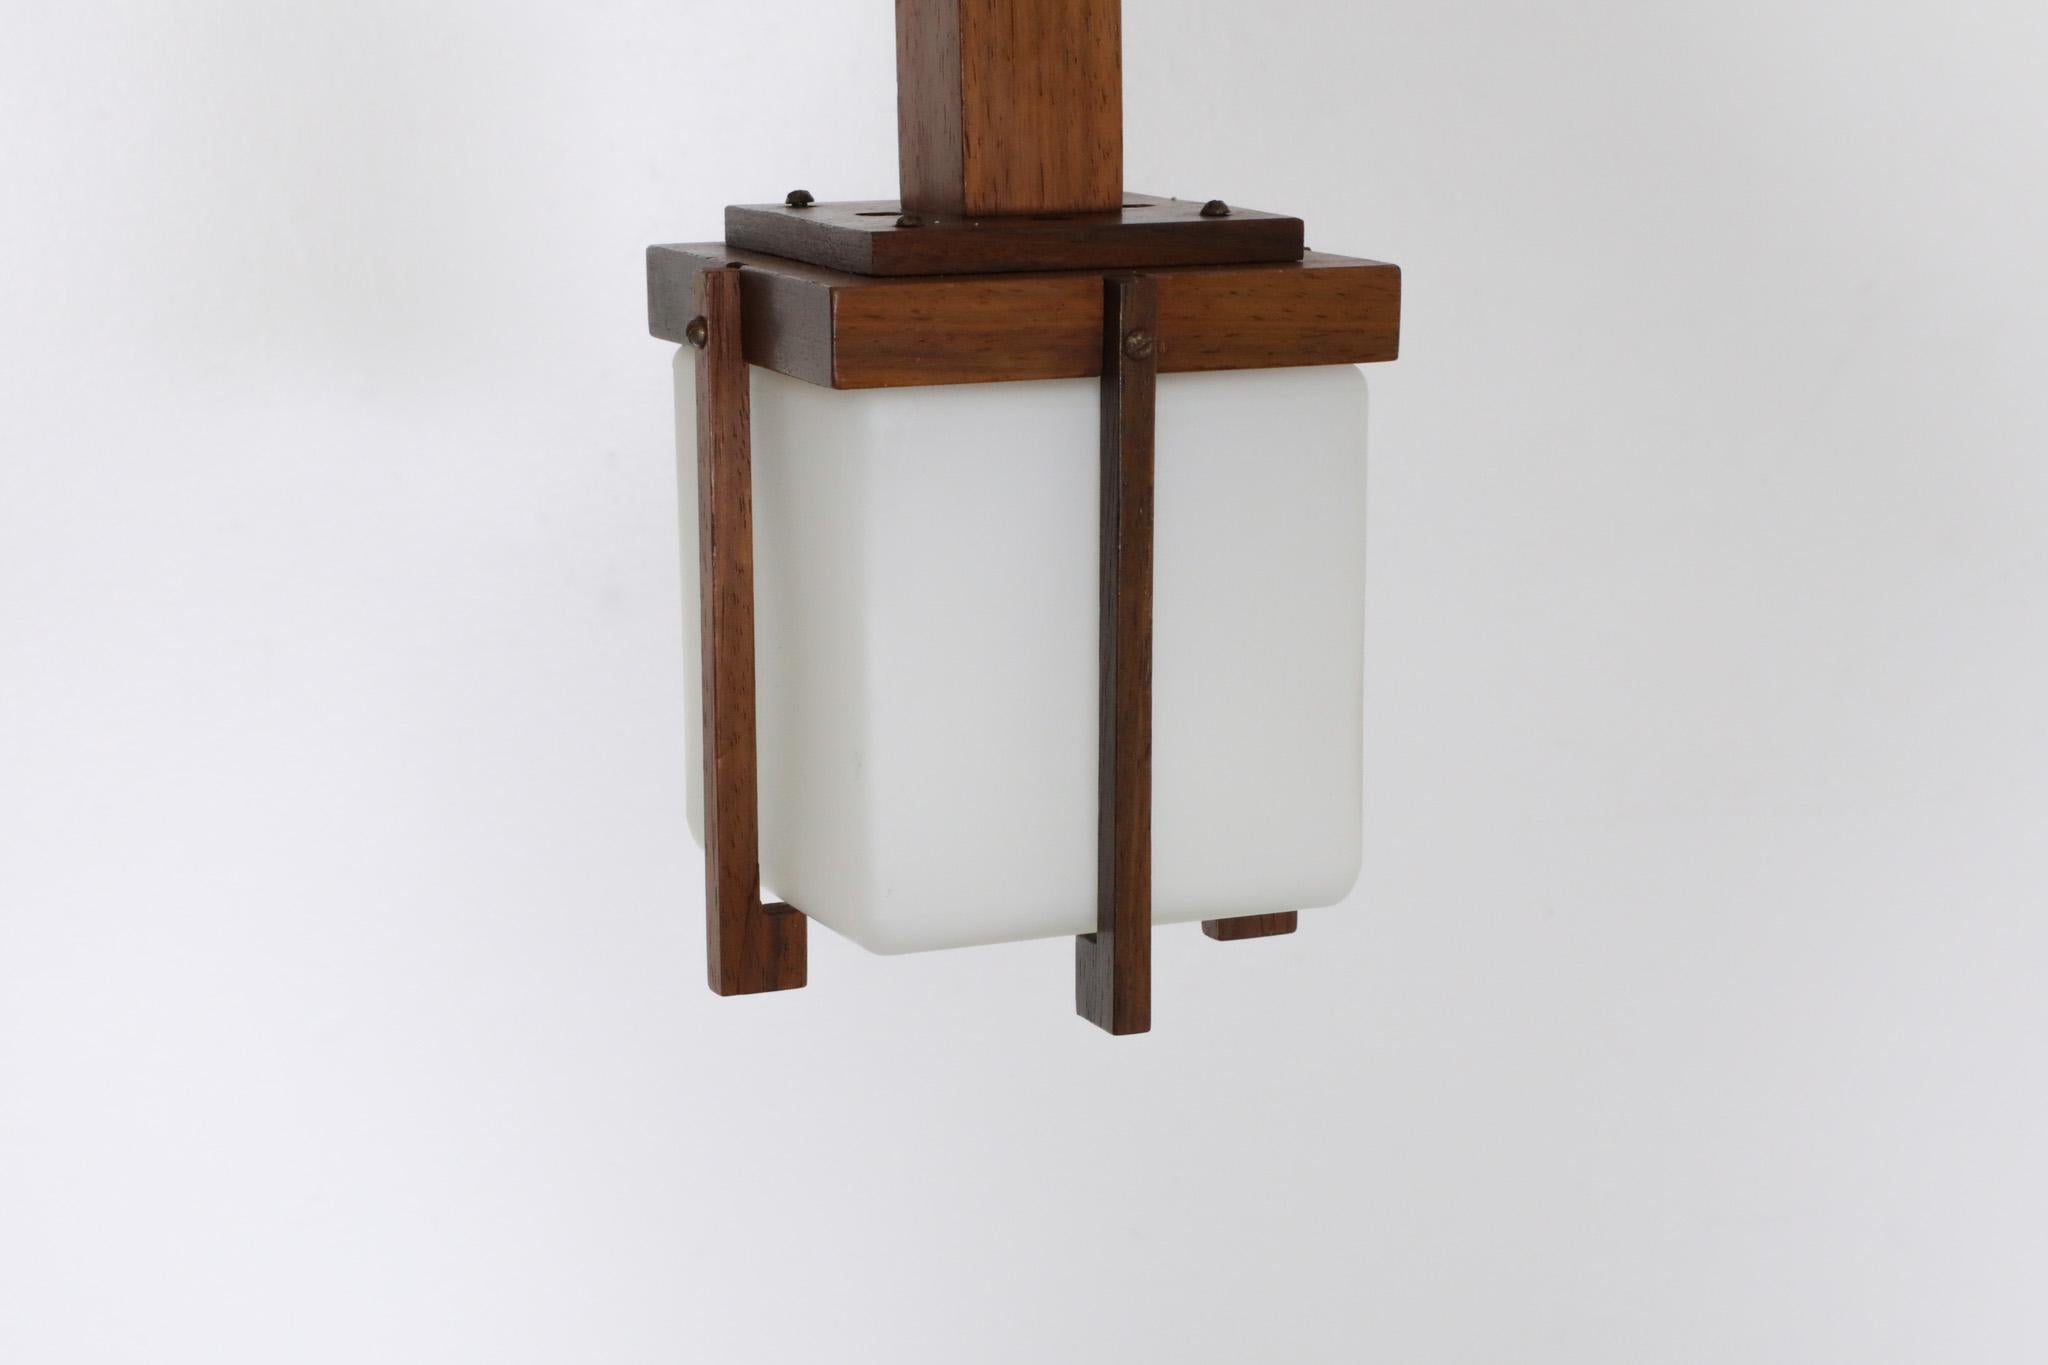 Harvey Guzzini style, Mid-Century, small Scandinavian hanging lamp in a minimalist style. Teak lantern pendant with complementing milk glass shade. In original condition with wear and some scratching consistent with age and use.